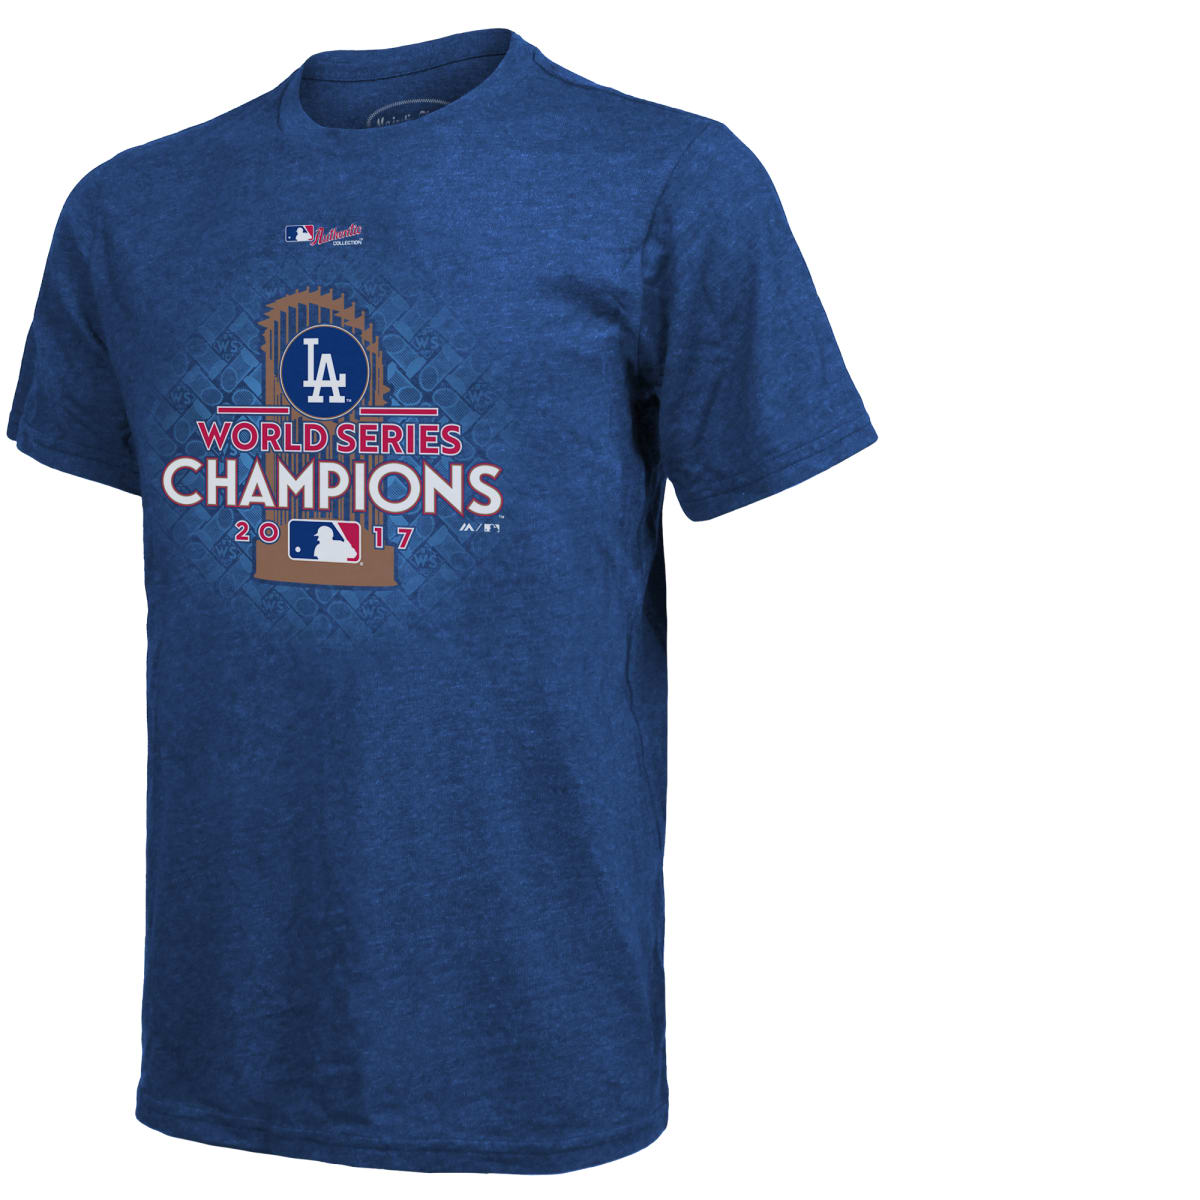 Dodgers World Series Championship gear, get yours now!